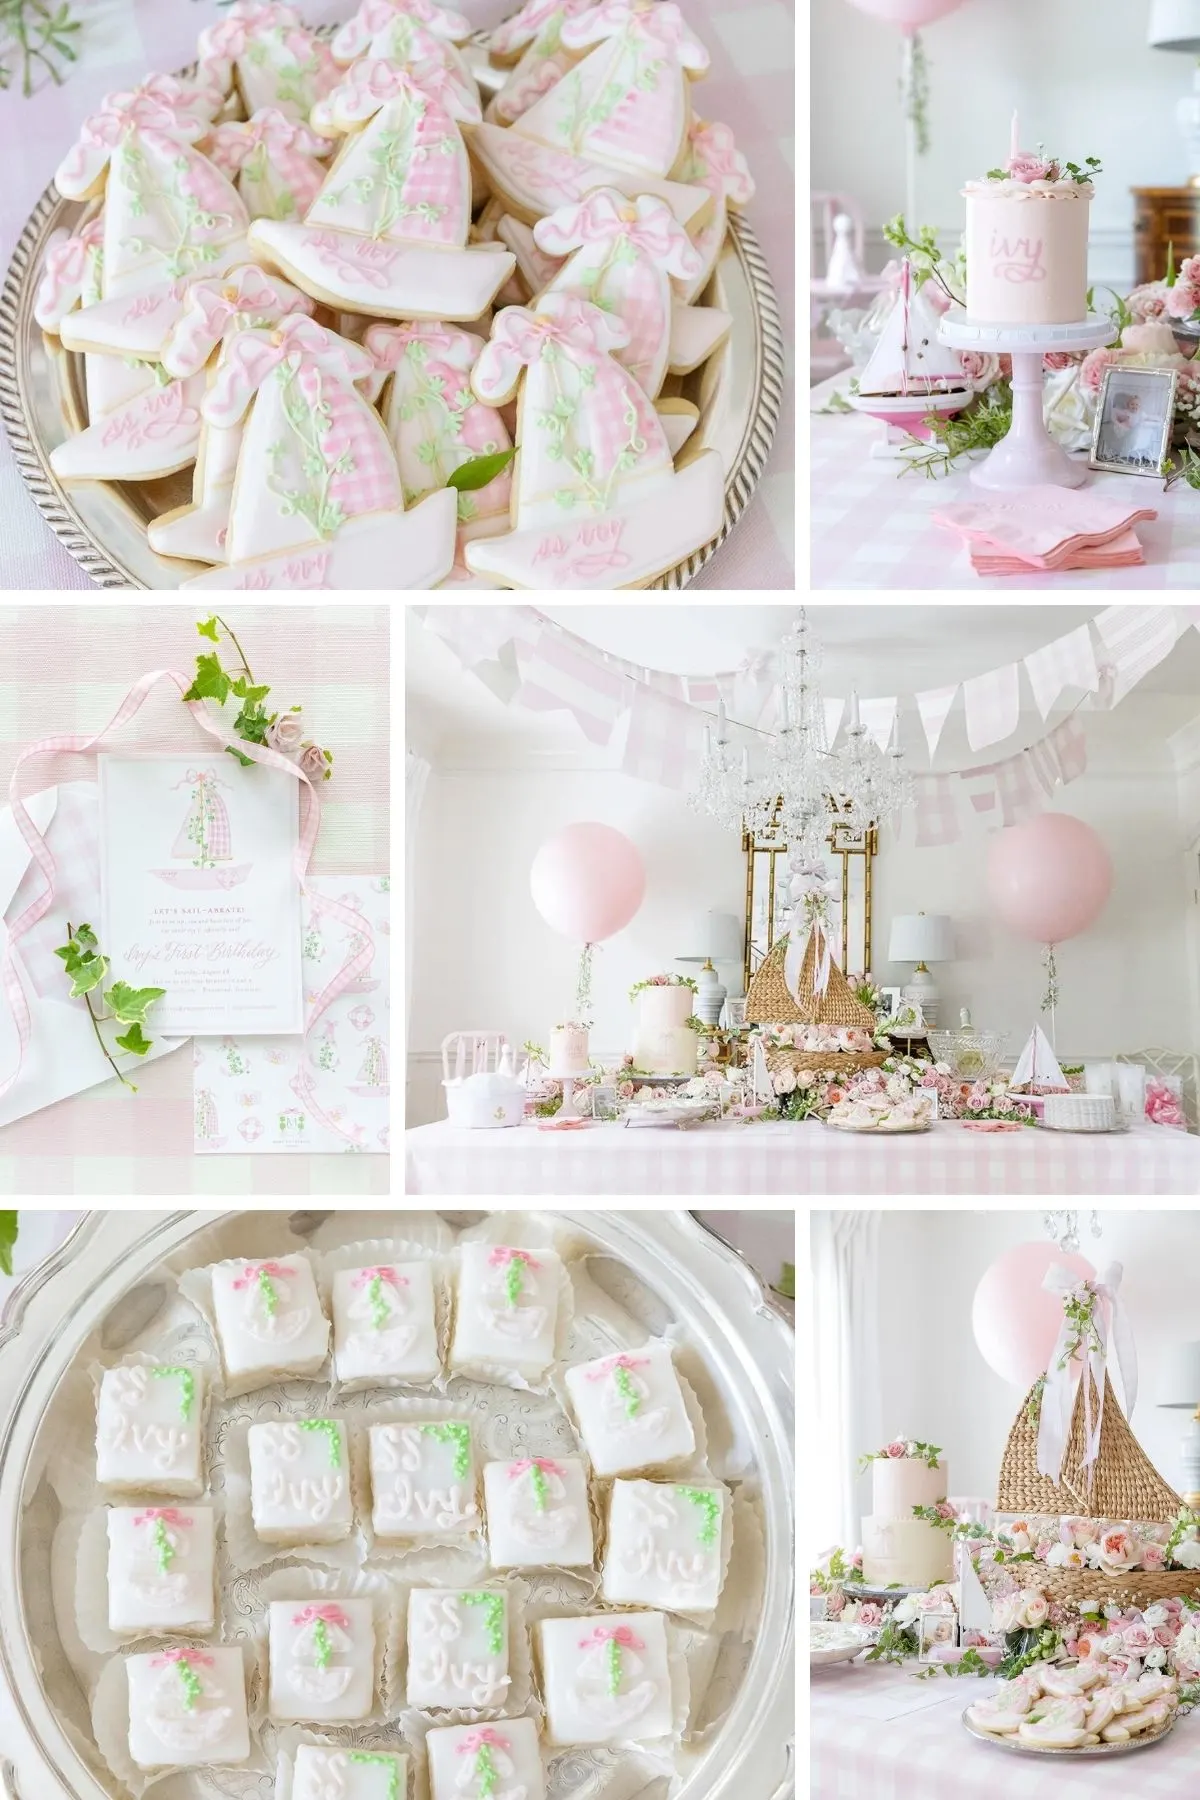 Photo collage from pink sailboat party theme including cookies, cake, and table scape.